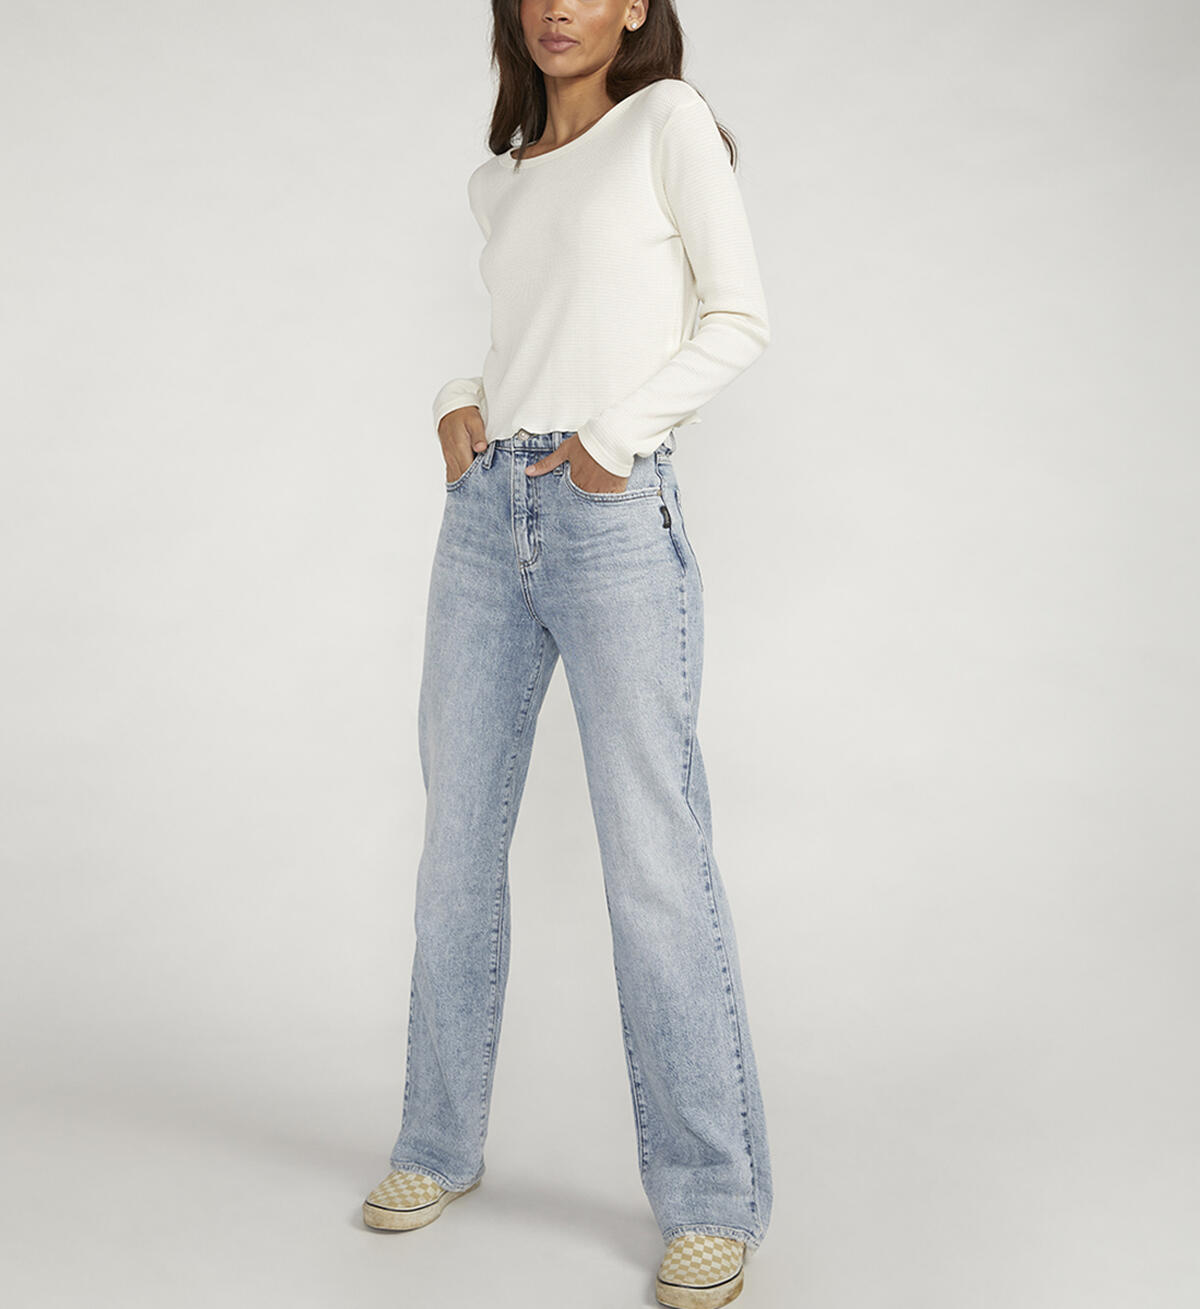 Highly Desirable High Rise Trouser Leg Jeans, Indigo, hi-res image number 3